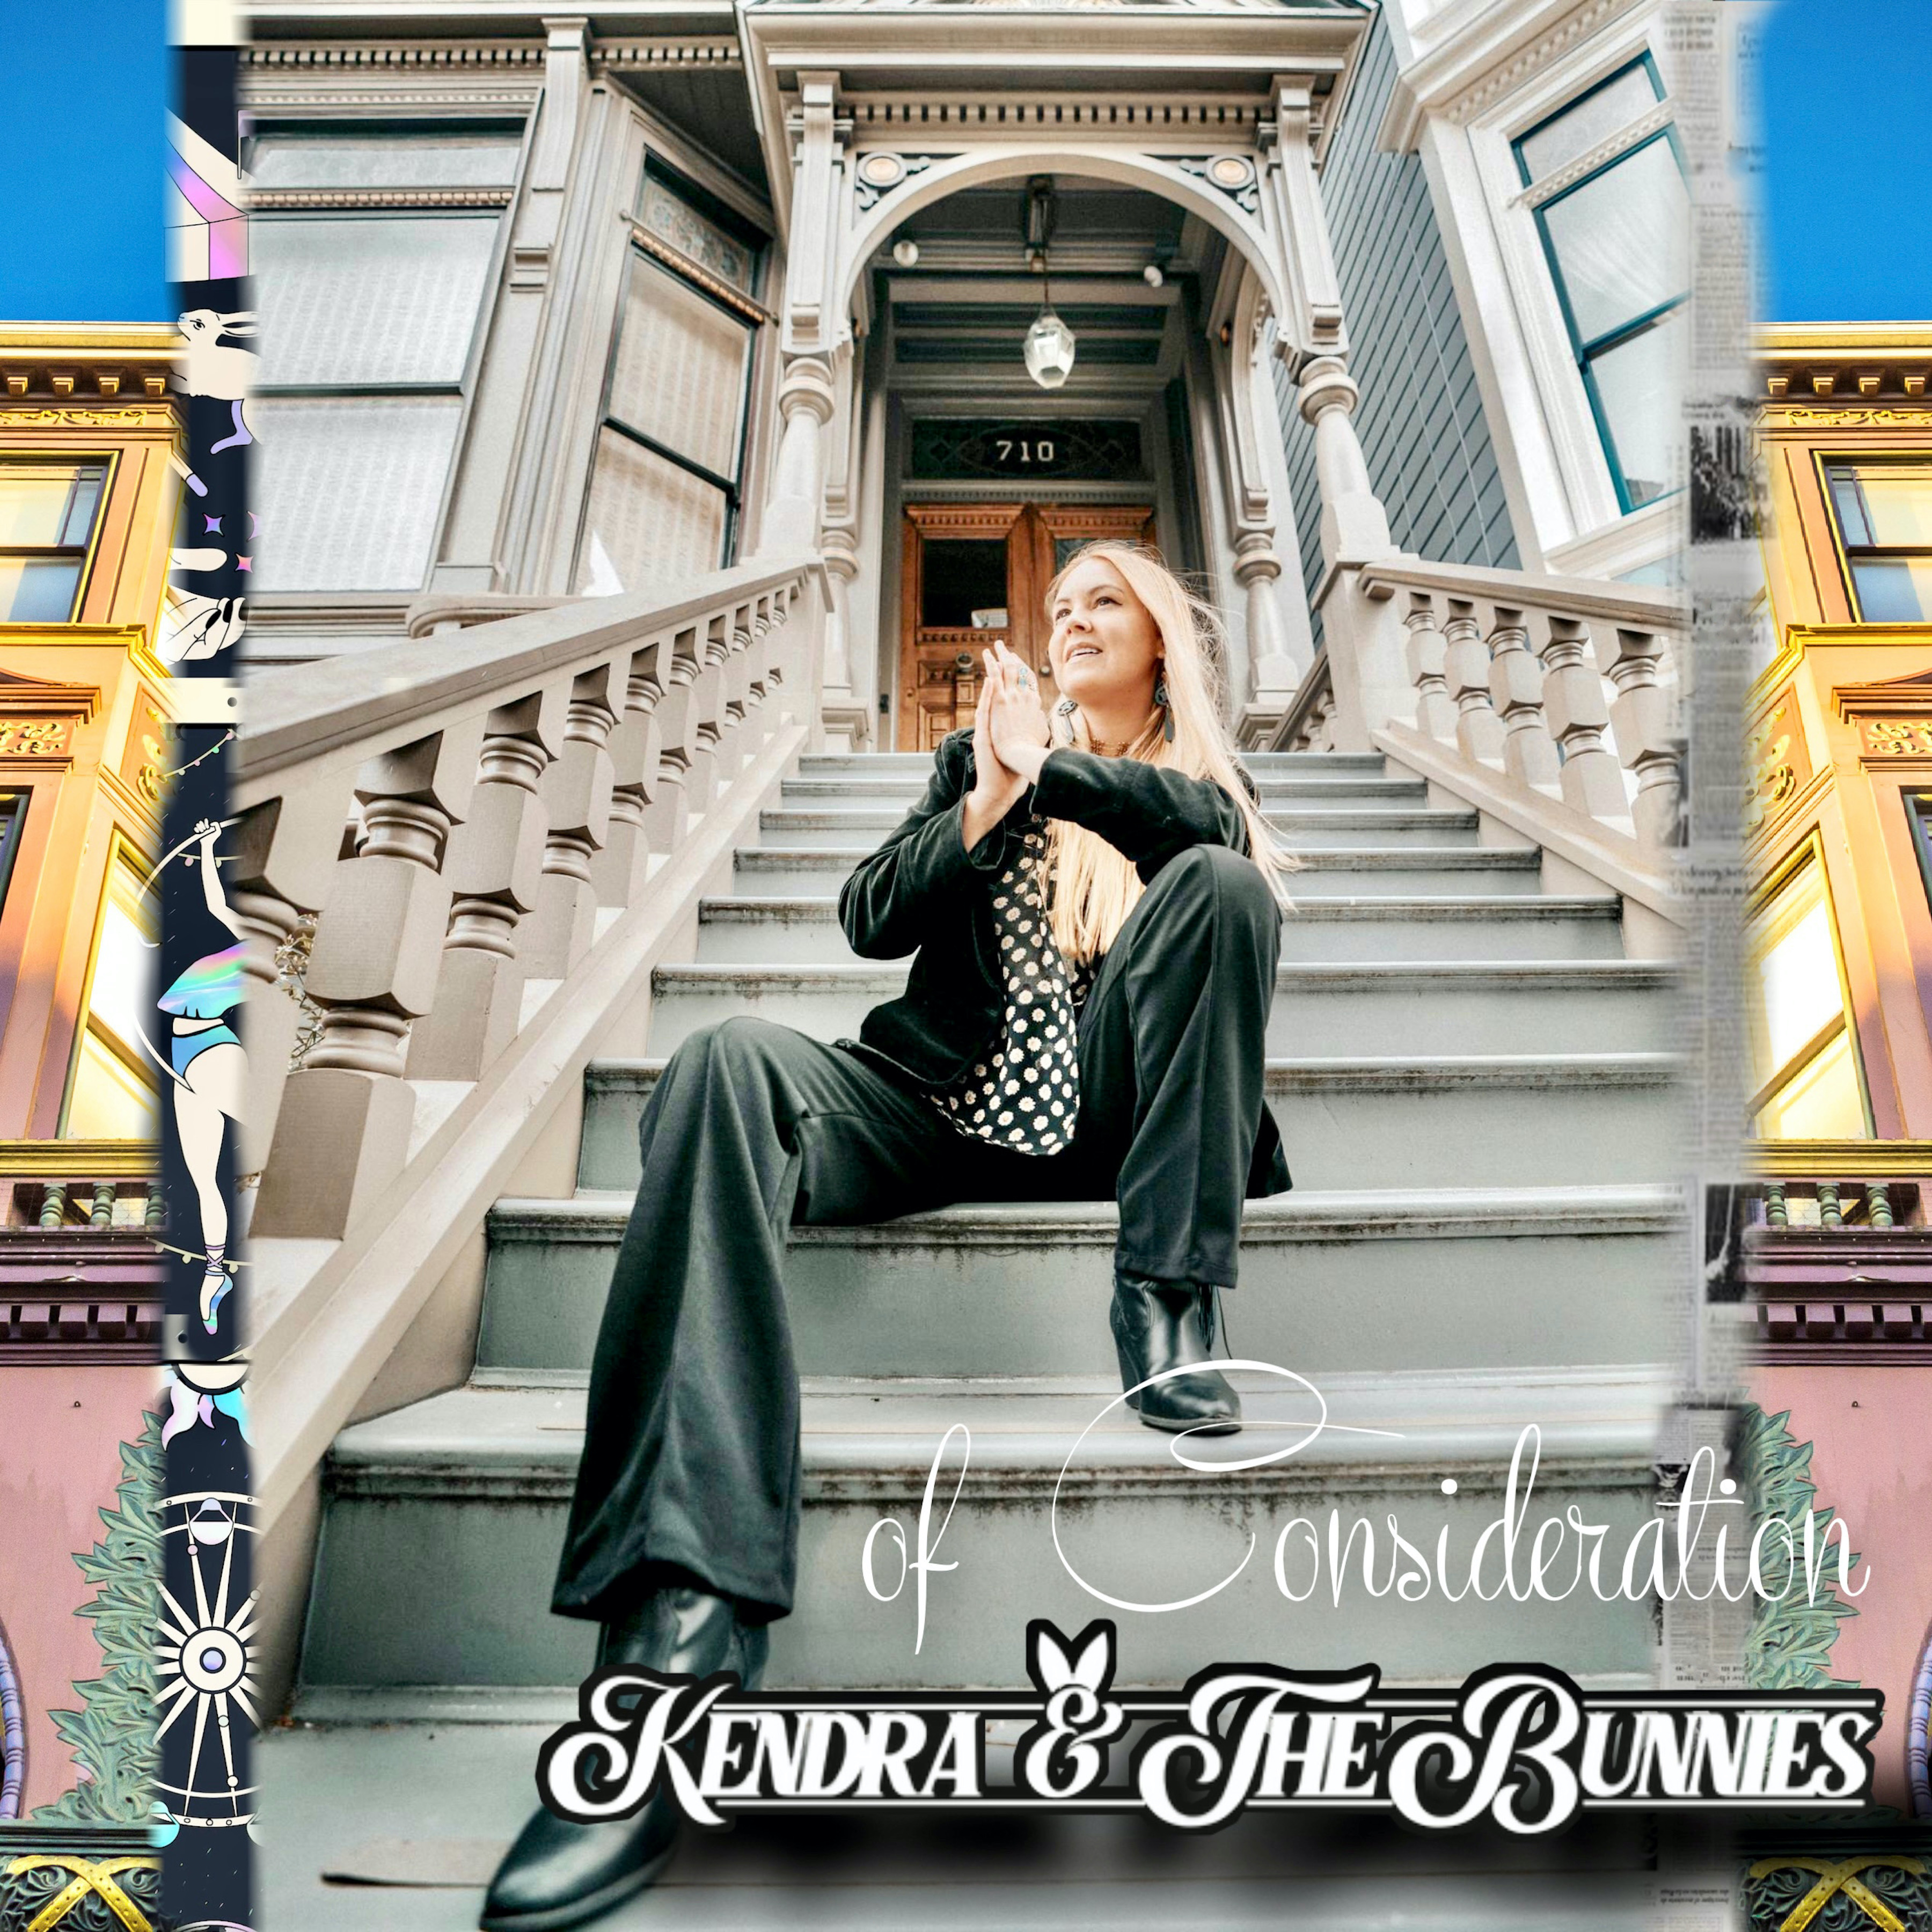 Kendra & the Bunnies just released "of Consideration"